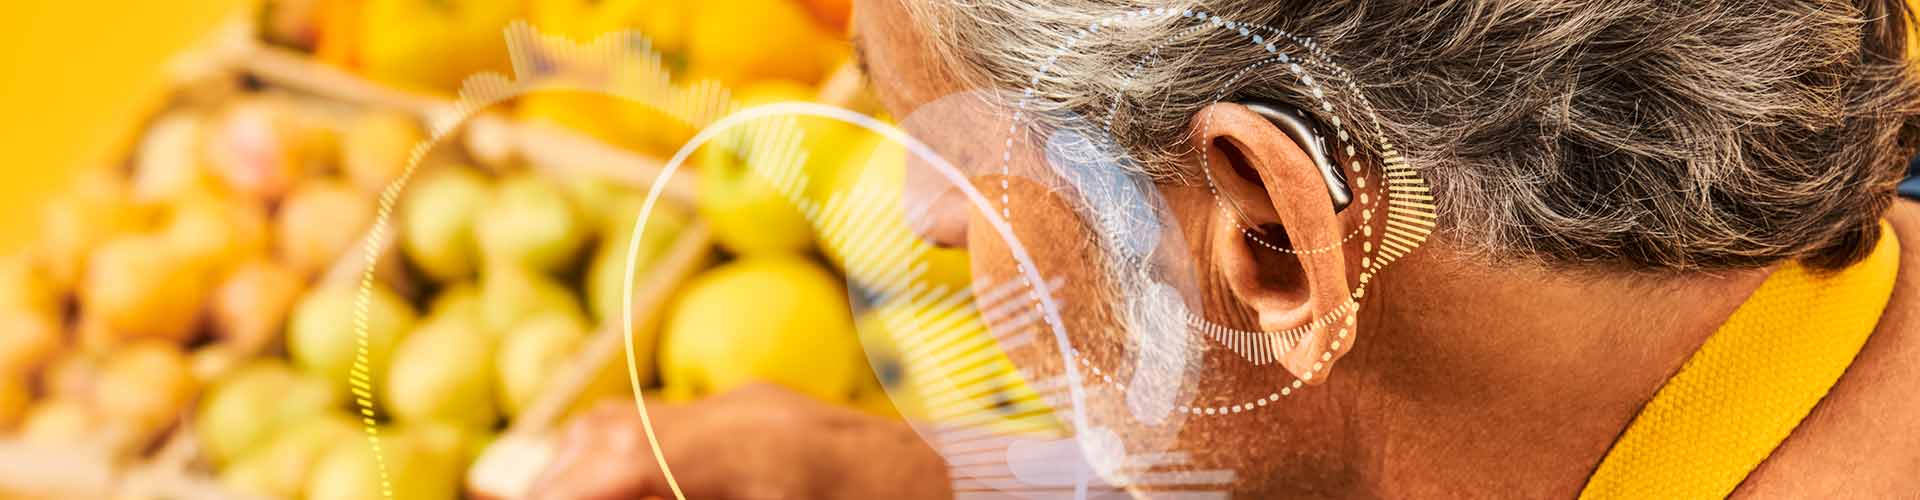 Man wears Philips HearLink rechargeable miniRITE T R hearing aids while arranging oranges in his sustainable farmer's market stand